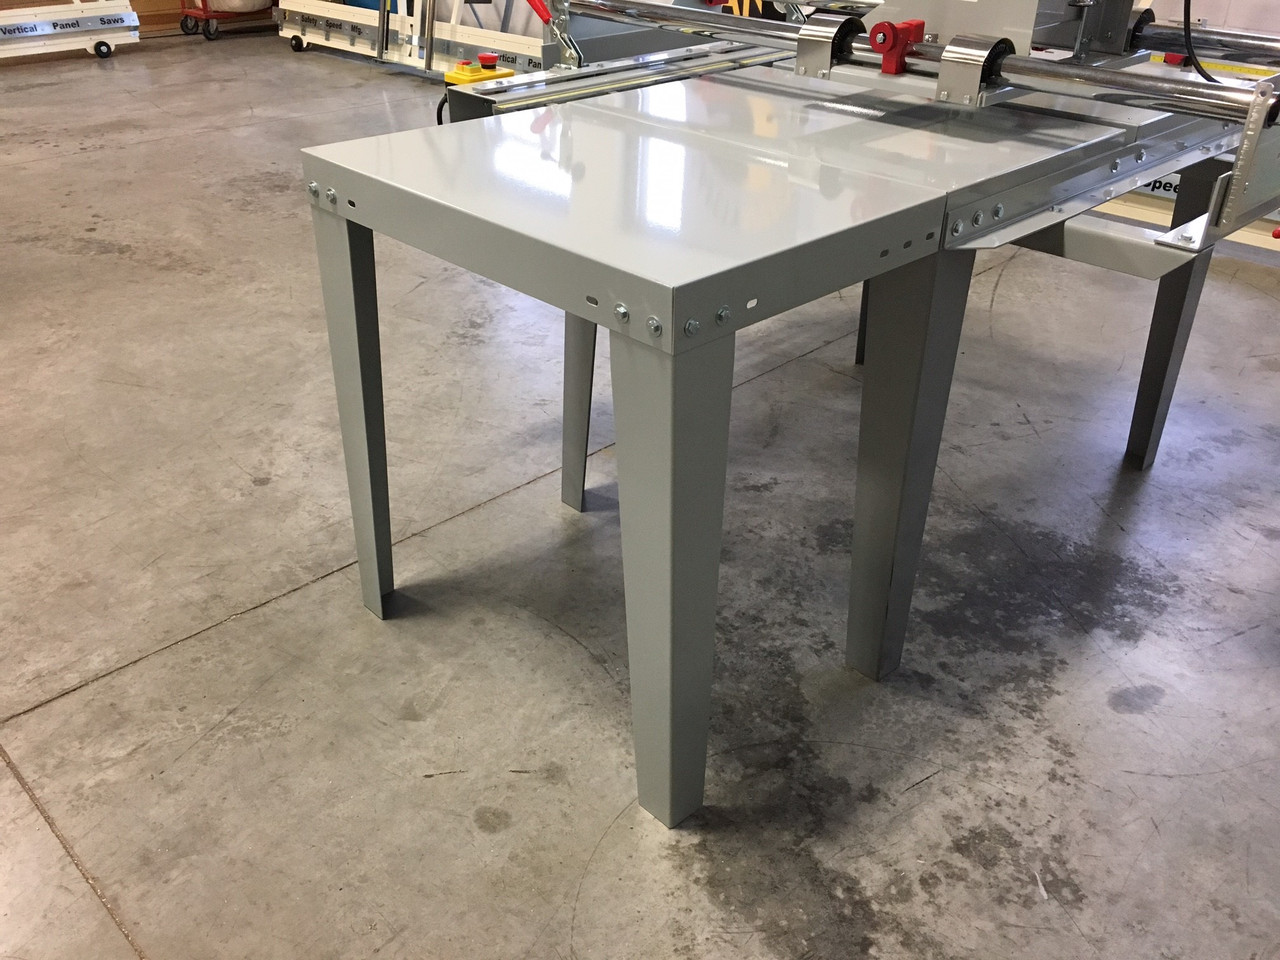 Extension Table For TR2 (Per Side)